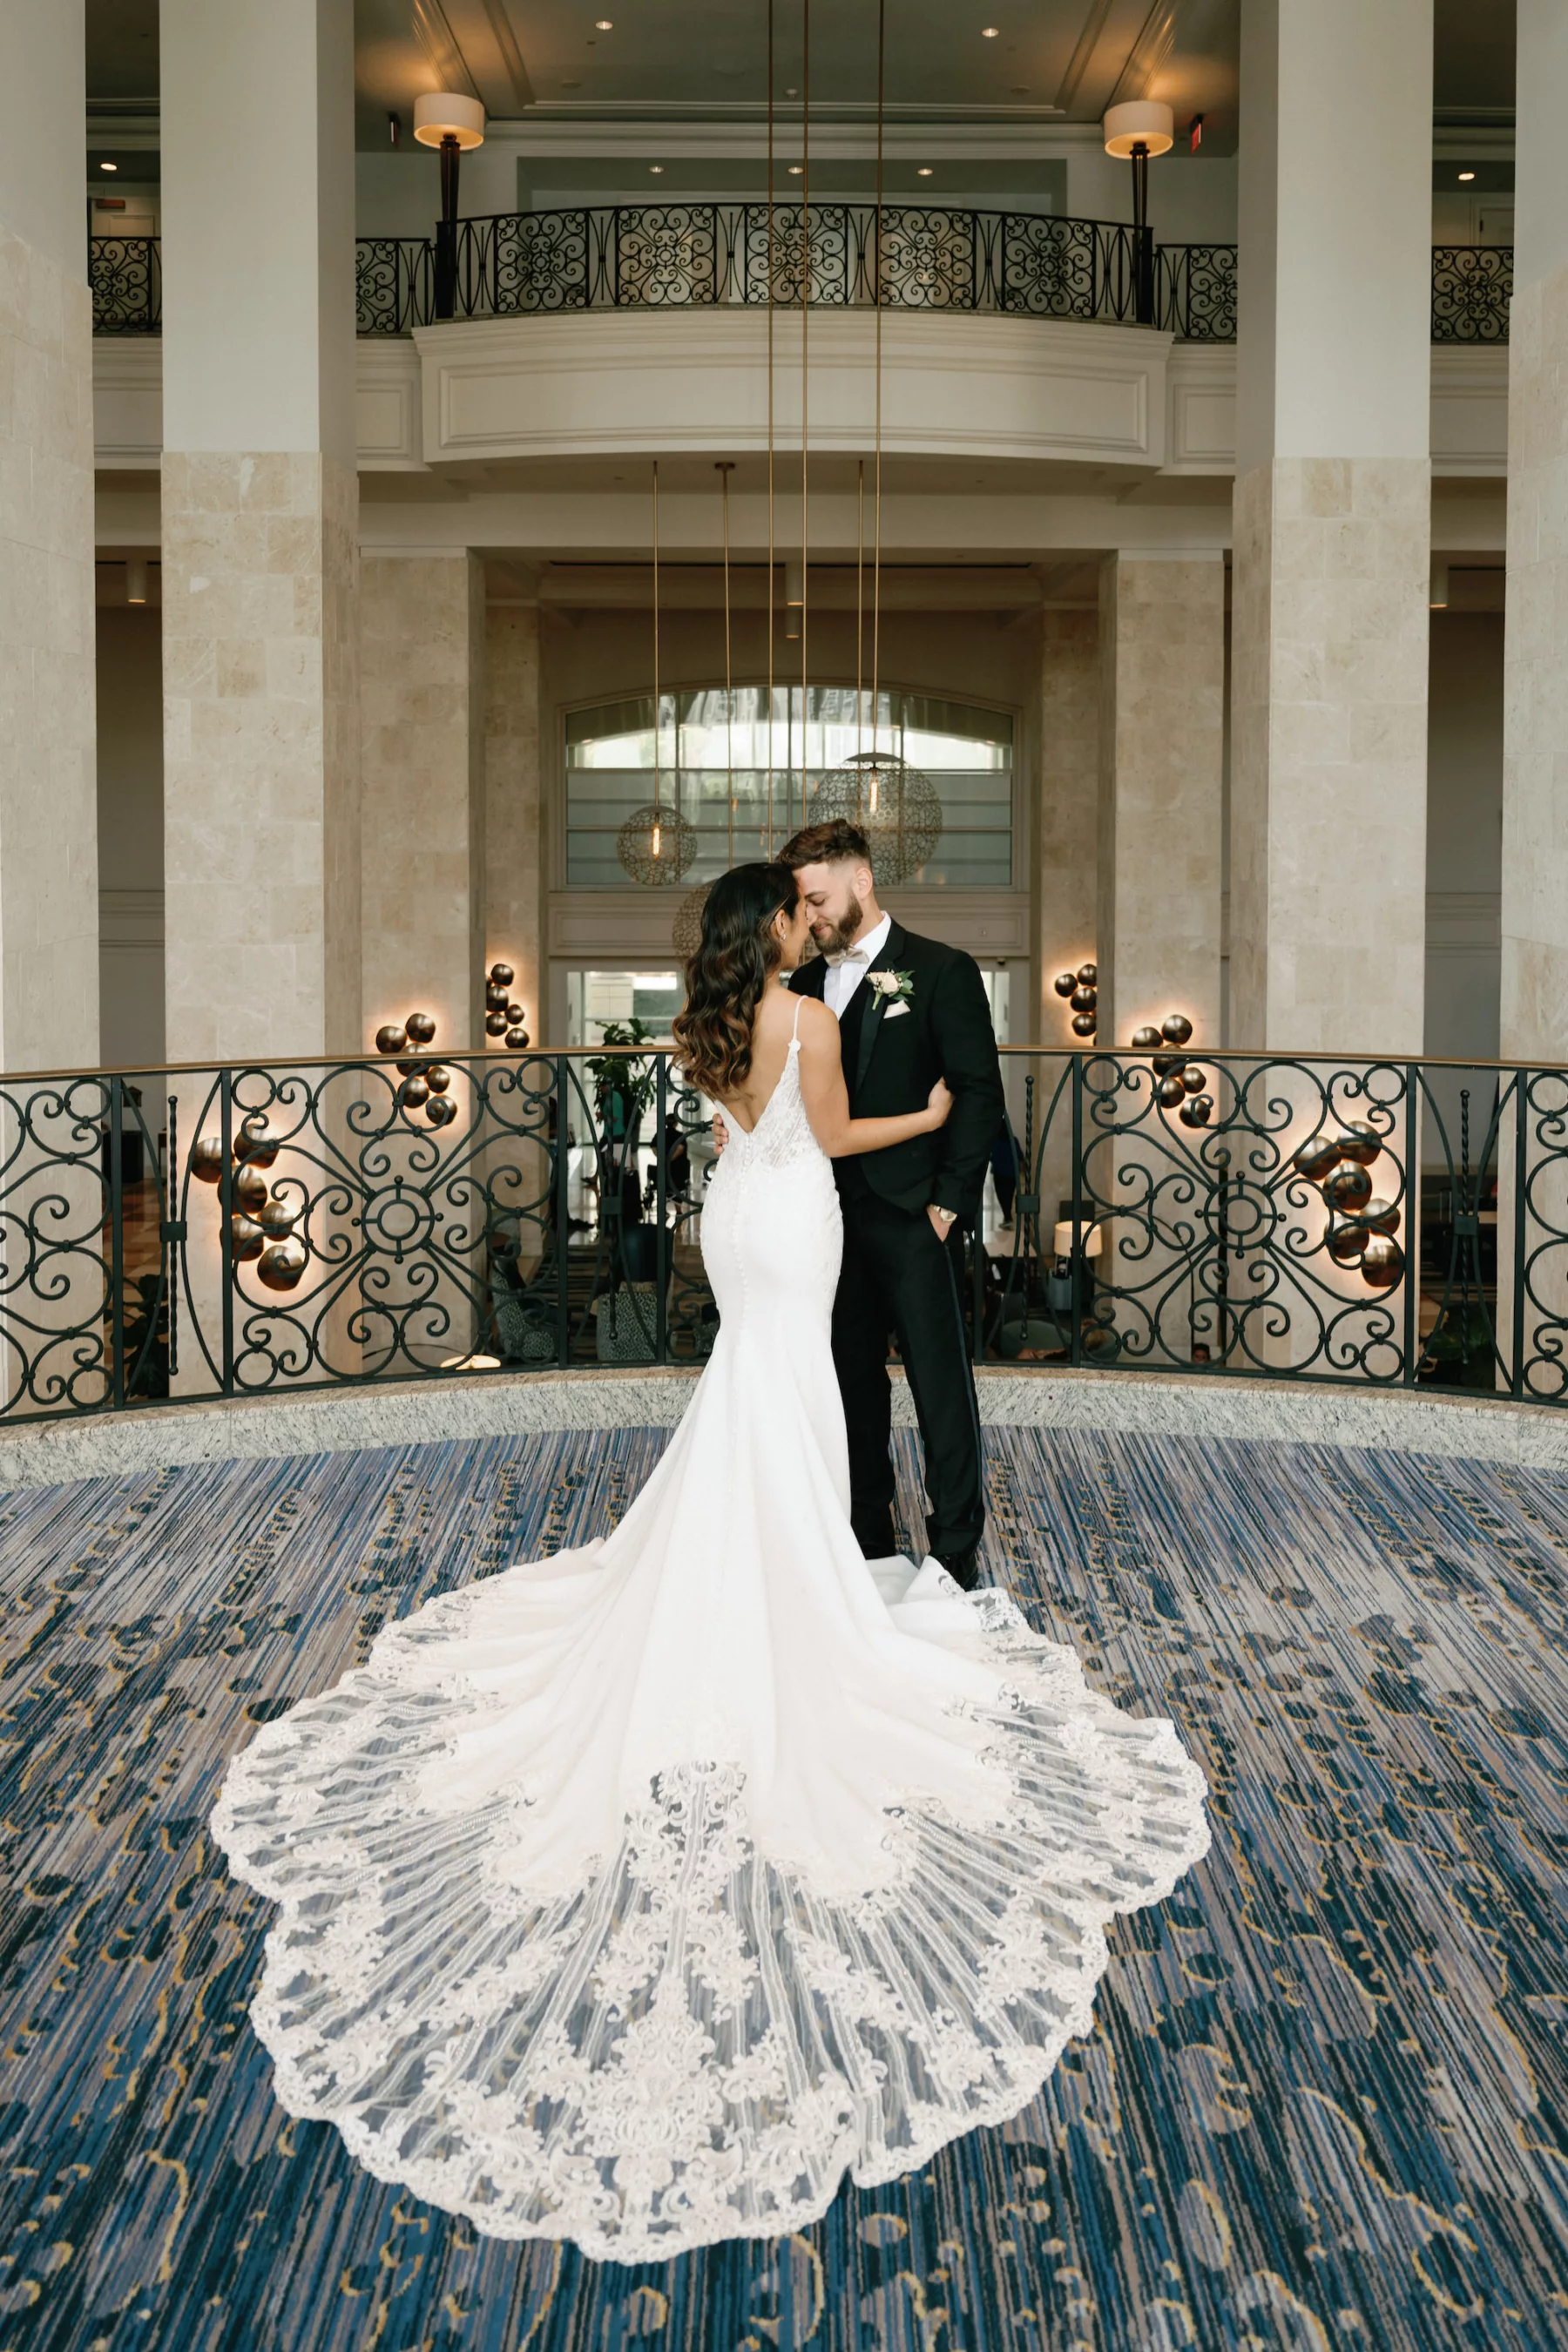 Bride and Groom First Look Wedding Portrait | Tampa Photographer Dewitt for Love